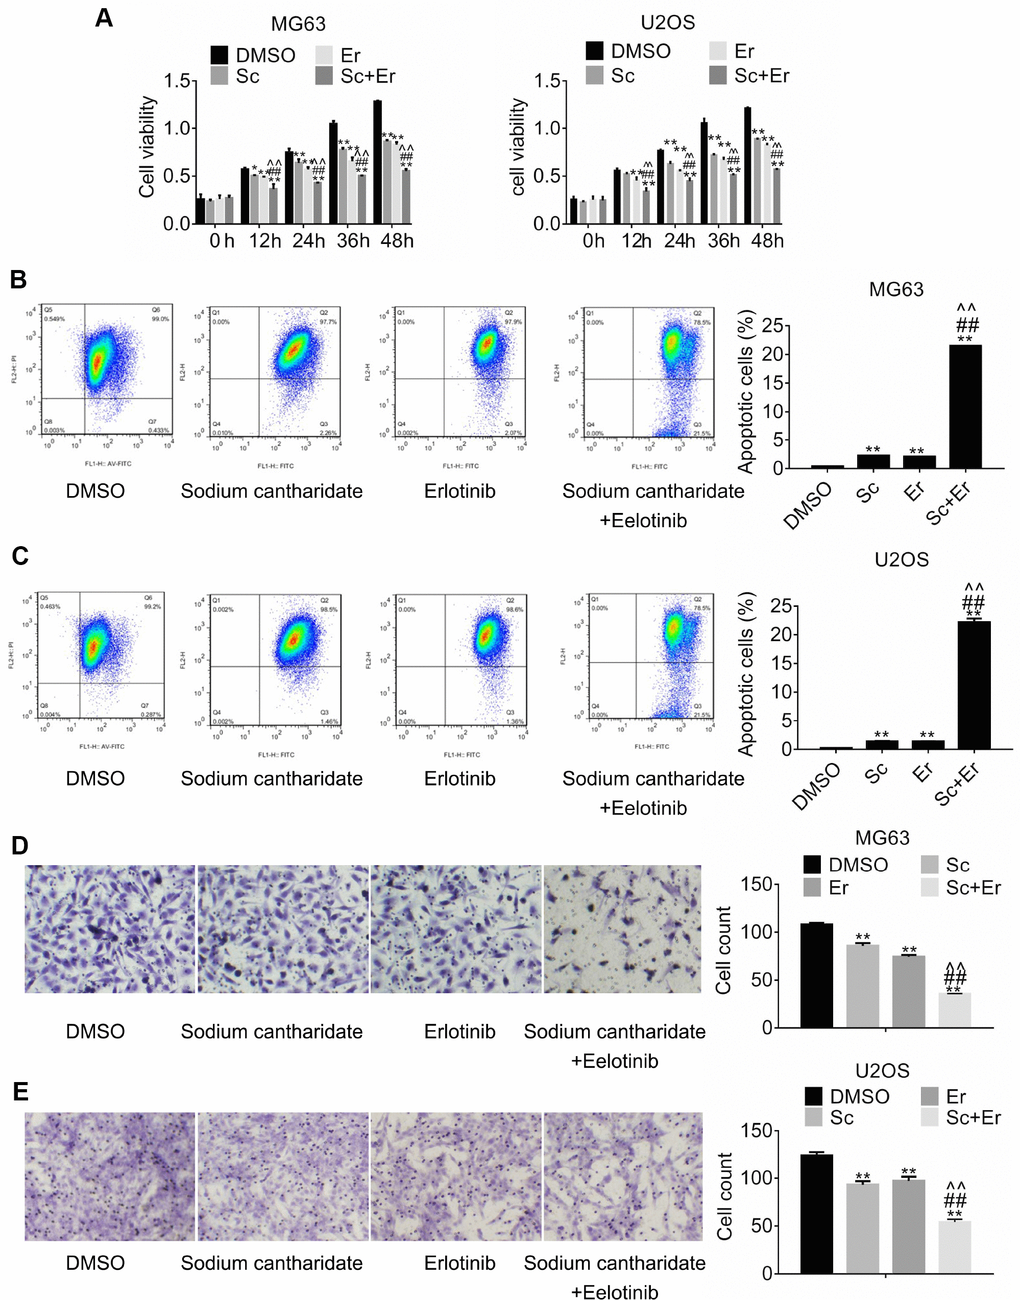 Combined treatment with sodium cantharidate and erlotinib enhances growth and migration inhibition and promotes apoptosis of osteosarcoma cells. (A). MG63 and U2OS cells were treated with DMSO, SC, erlotinib, or SC plus erlotinib for the indicated times, and the MTT assay was performed to determine cell viability. Apoptosis analysis (JC-1 staining) was conducted in MG63 (B) and U2OS (C) cells treated as above. Migration assay results in MG63 (D) and U2OS (E) cells 24 h after individual or combined drug treatment. Magnification, 200x. Error bars indicate SD. **p ##p 